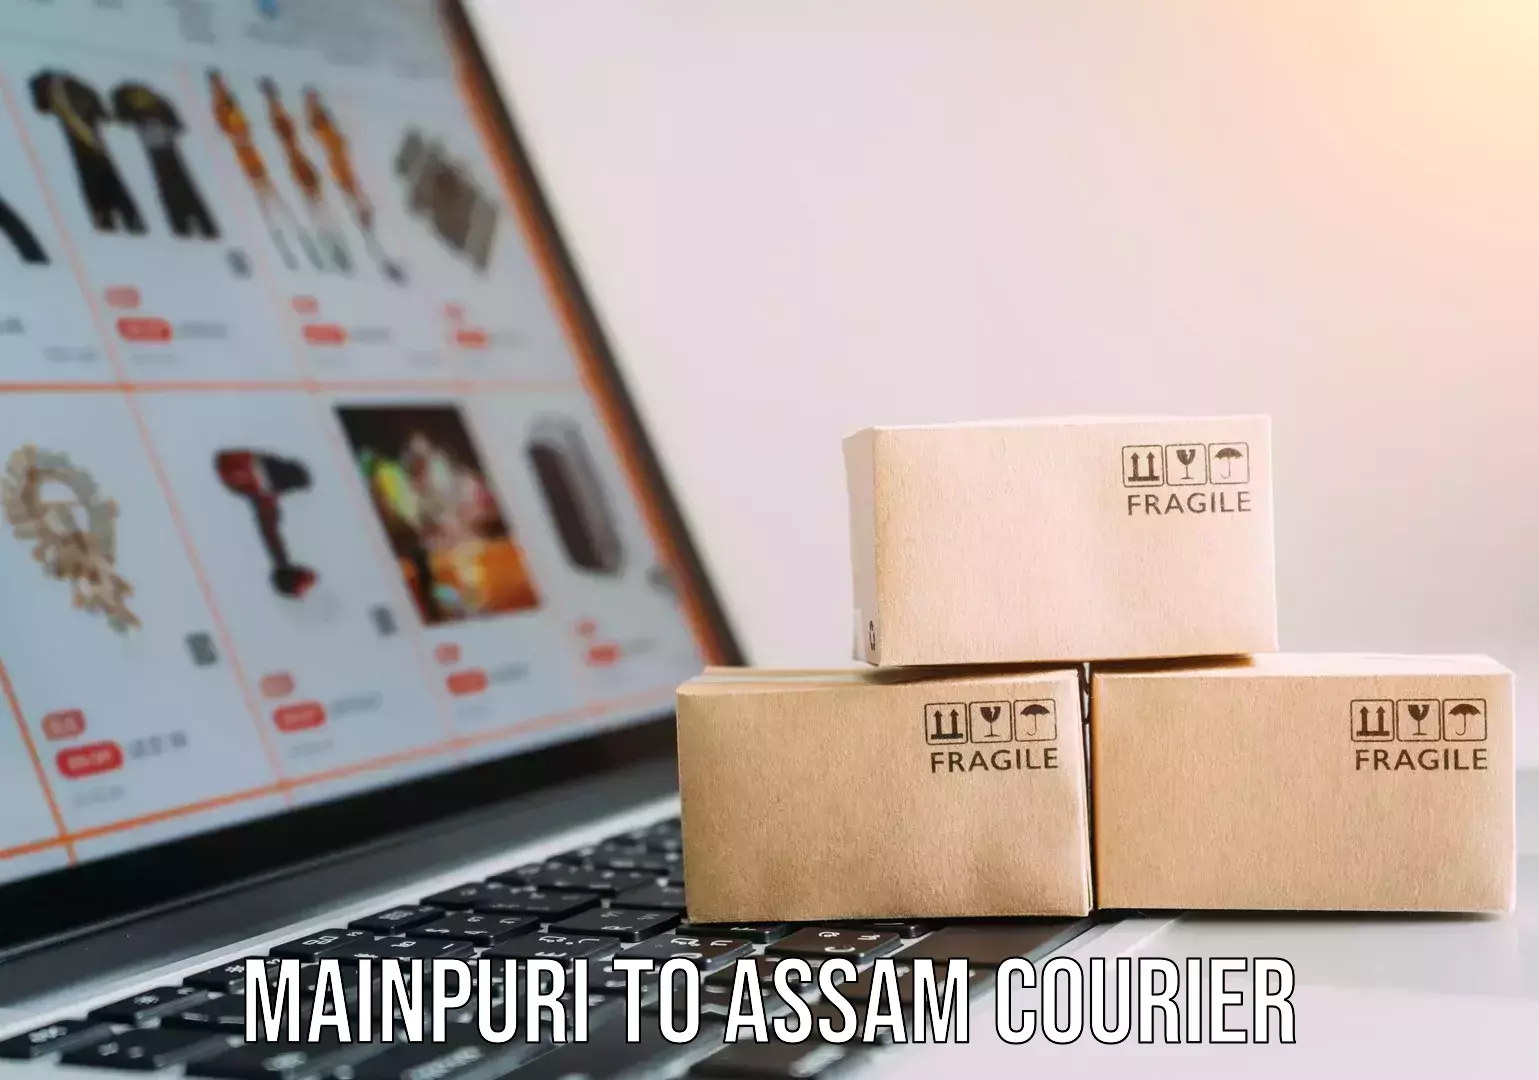 Trusted relocation experts Mainpuri to Assam